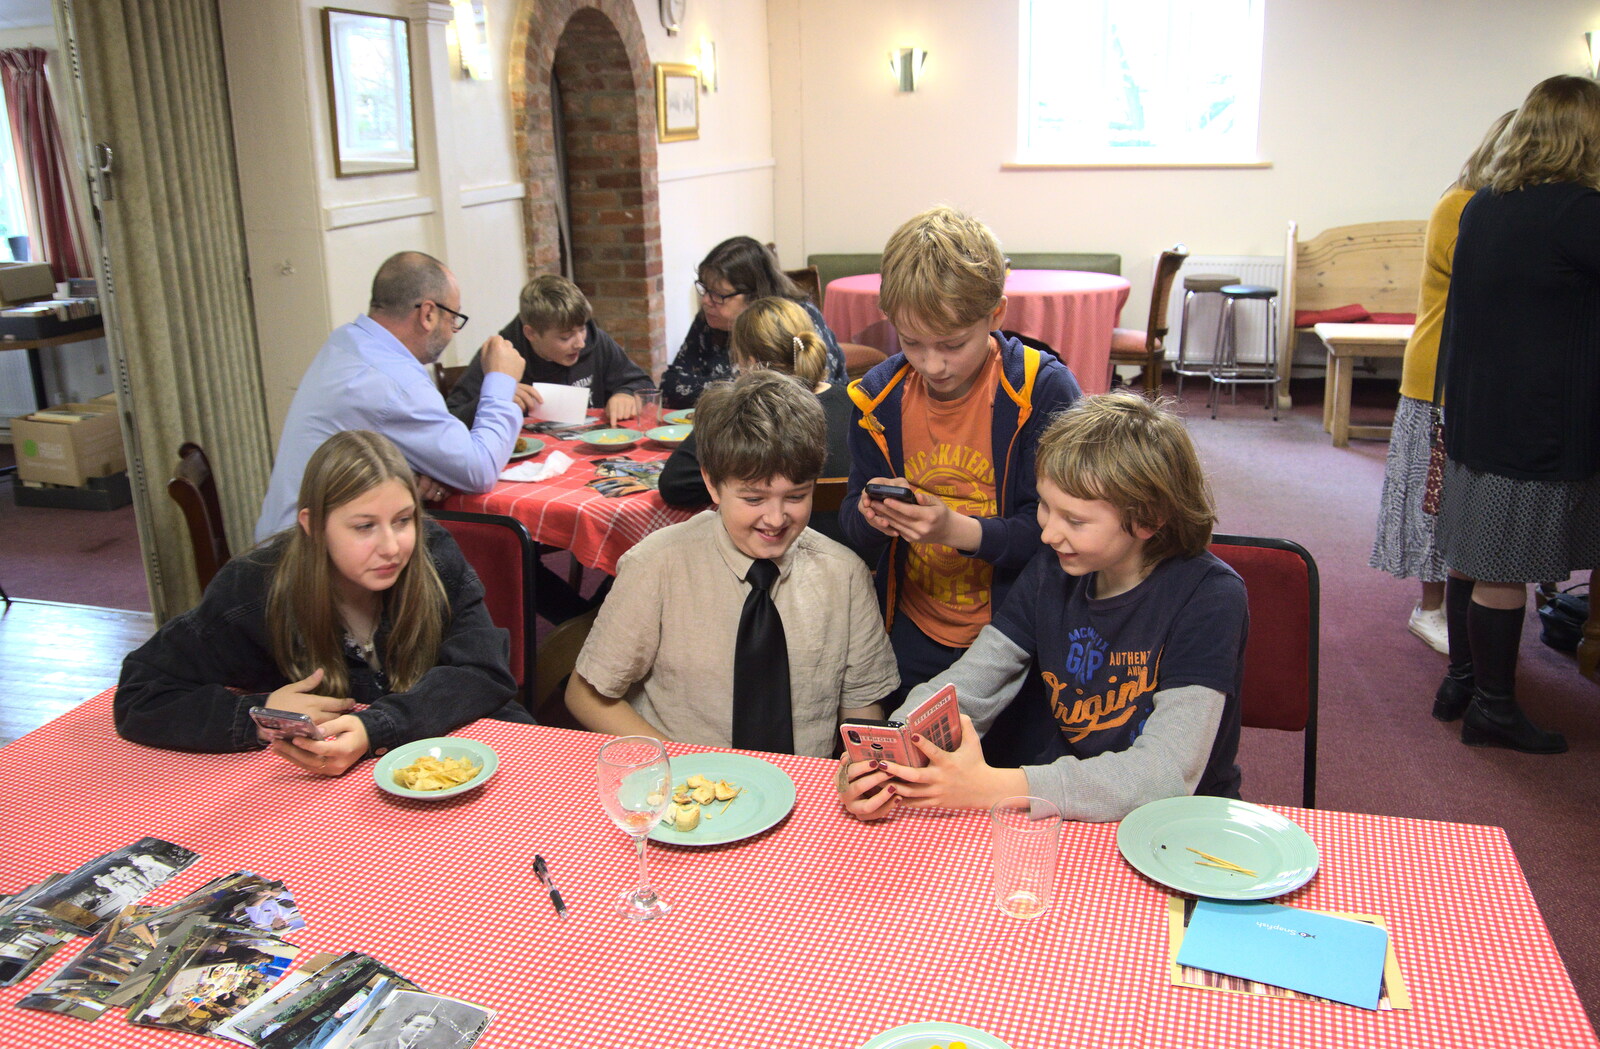 Grandad's Memorial Do, The Village Hall, Brome, Suffolk - 28th October 2022: Oak shows off something on his phone